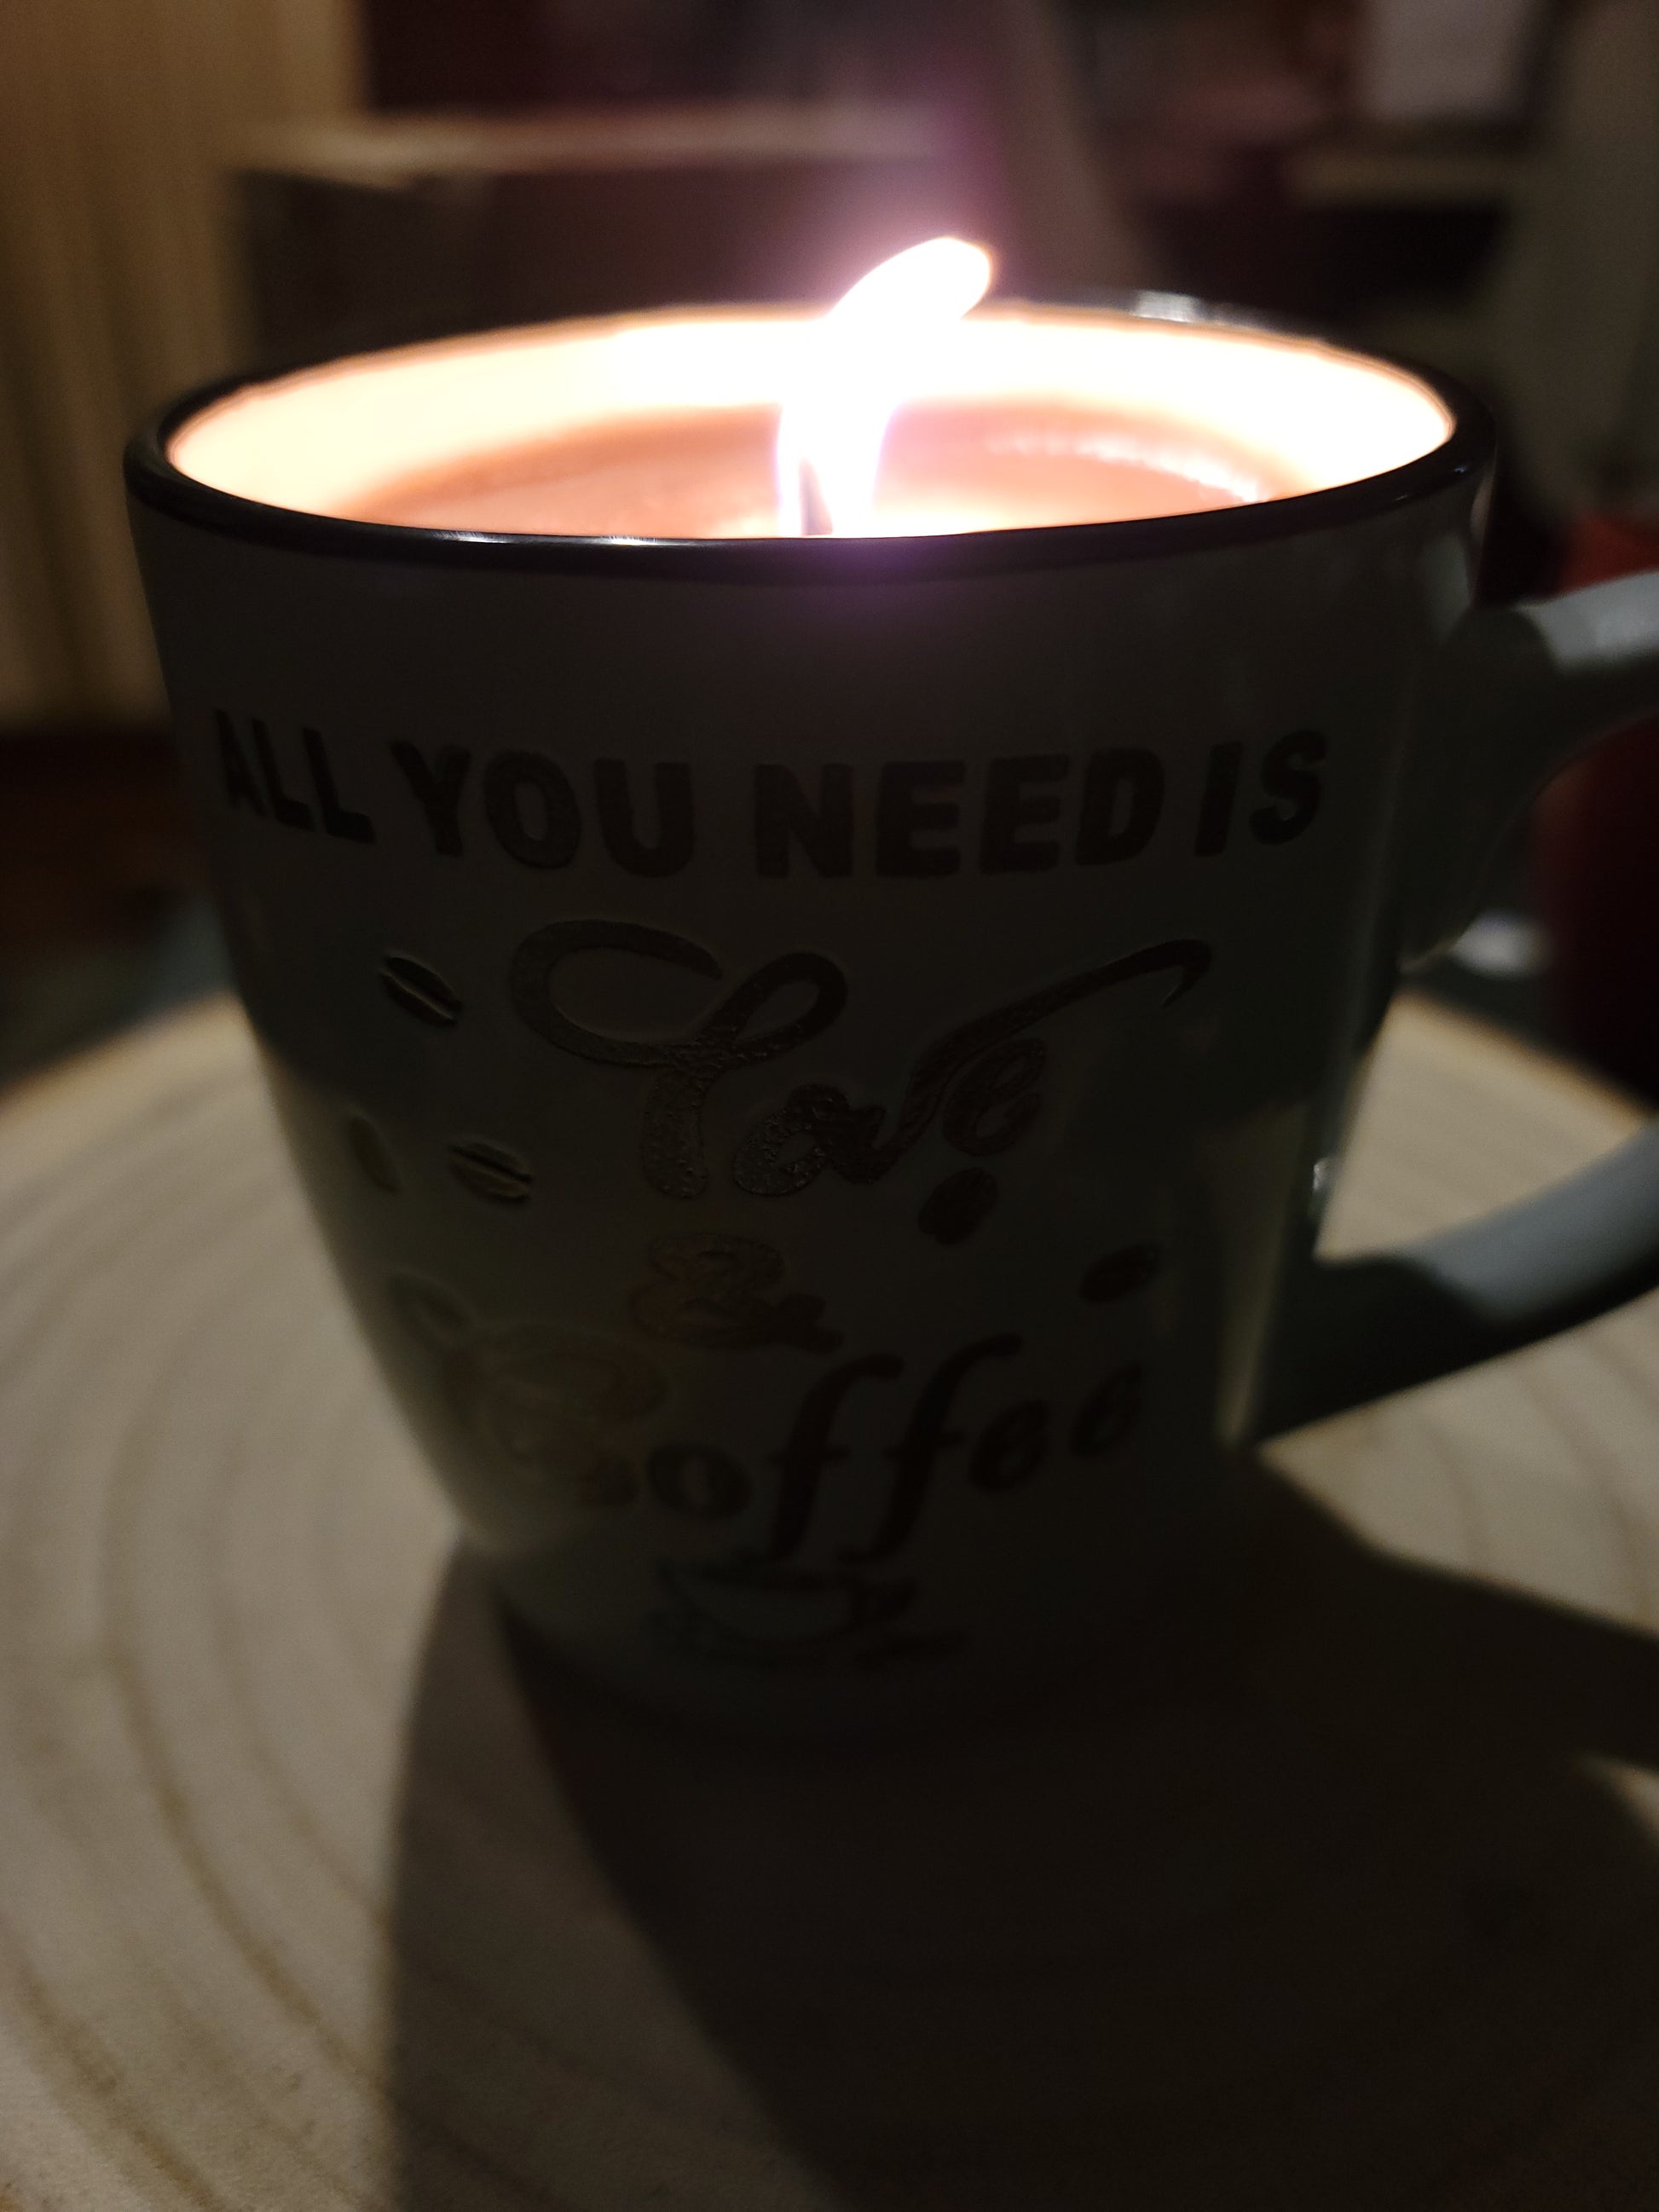 A hot cup of coffee, tea, chocolate in our scented candles, Burn the candle and keep the mug. Visit Now: www.lovedbymecreations.com